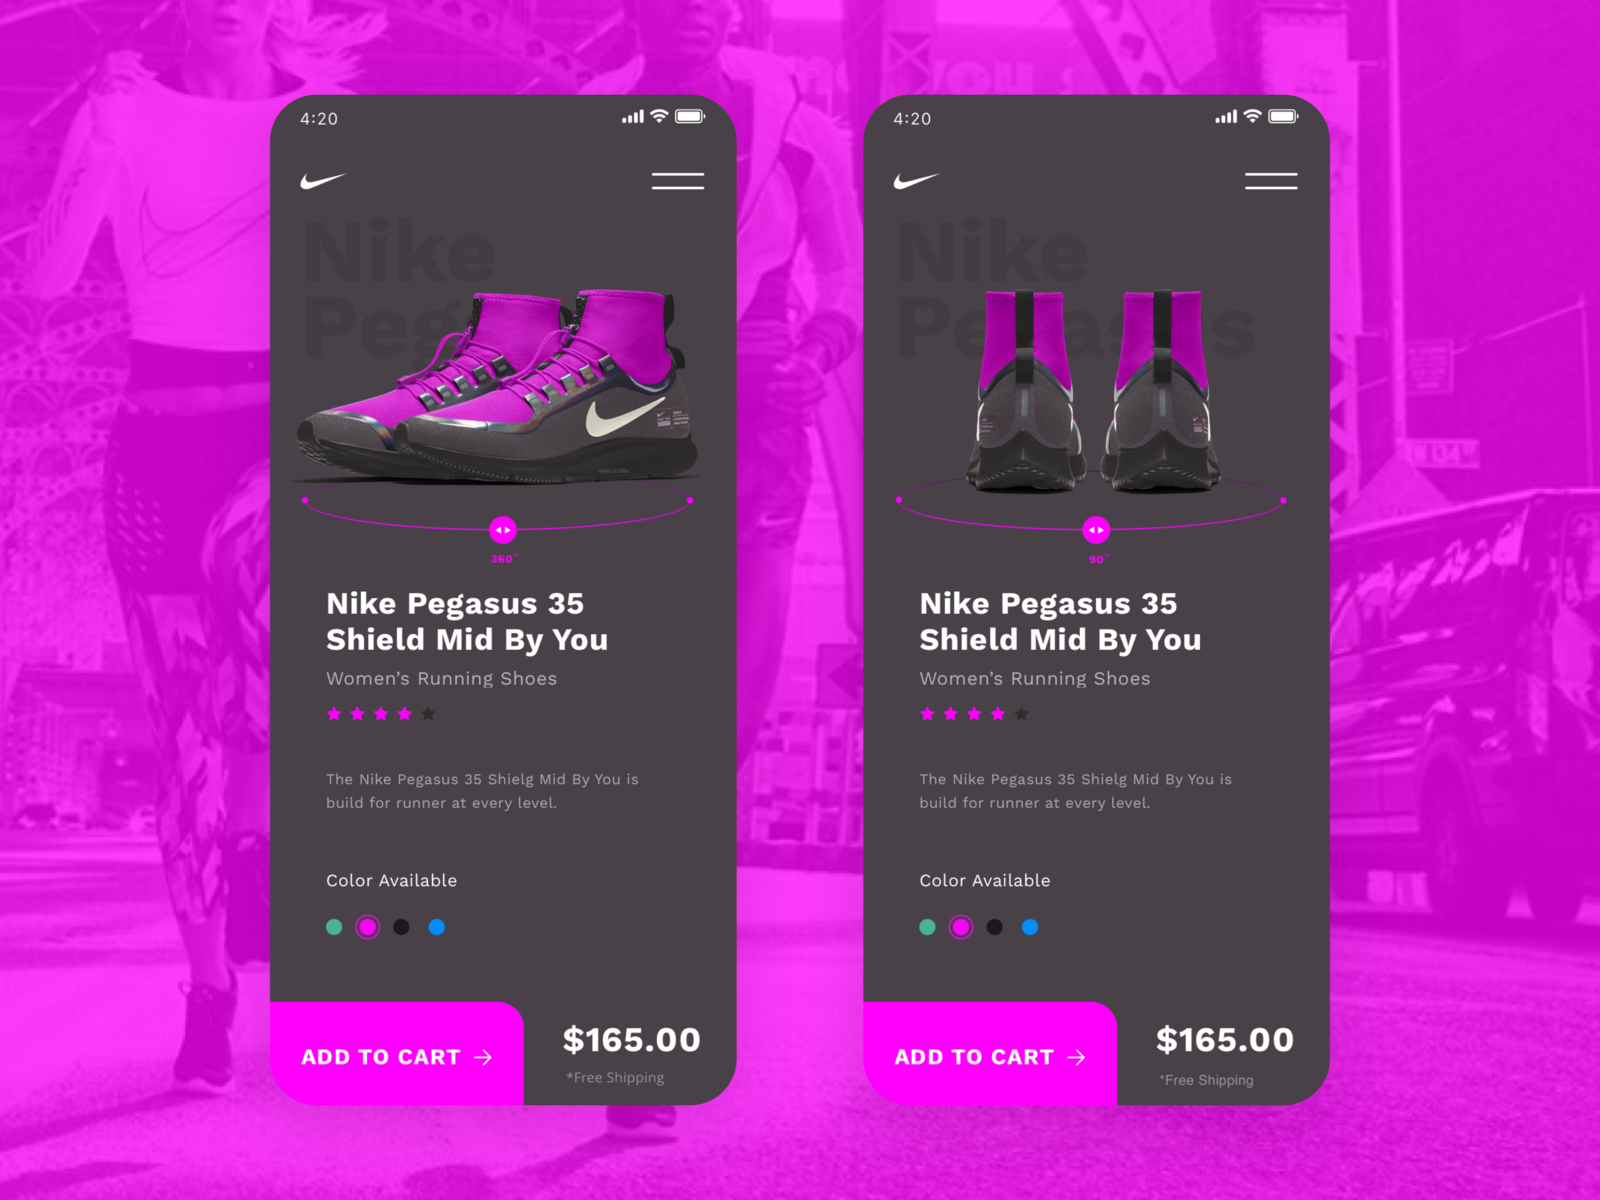 Online Shoes Store designs, themes 